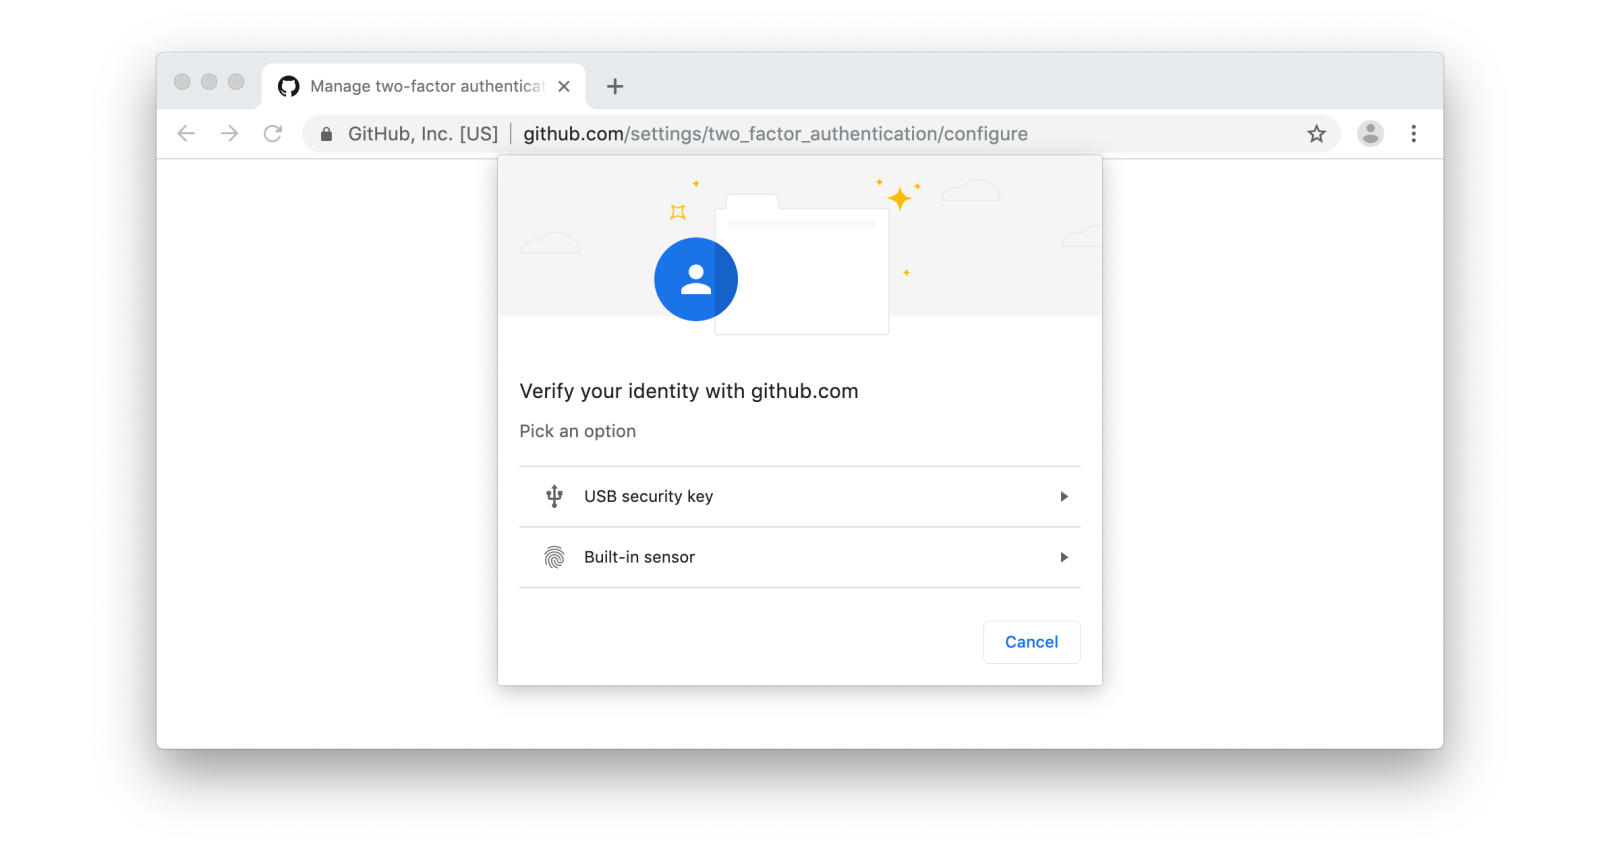 A security key registration prompt in Google Chrome, offering to "Verify your identity with github.com" using either a USB security key or built-in biometric sensor.